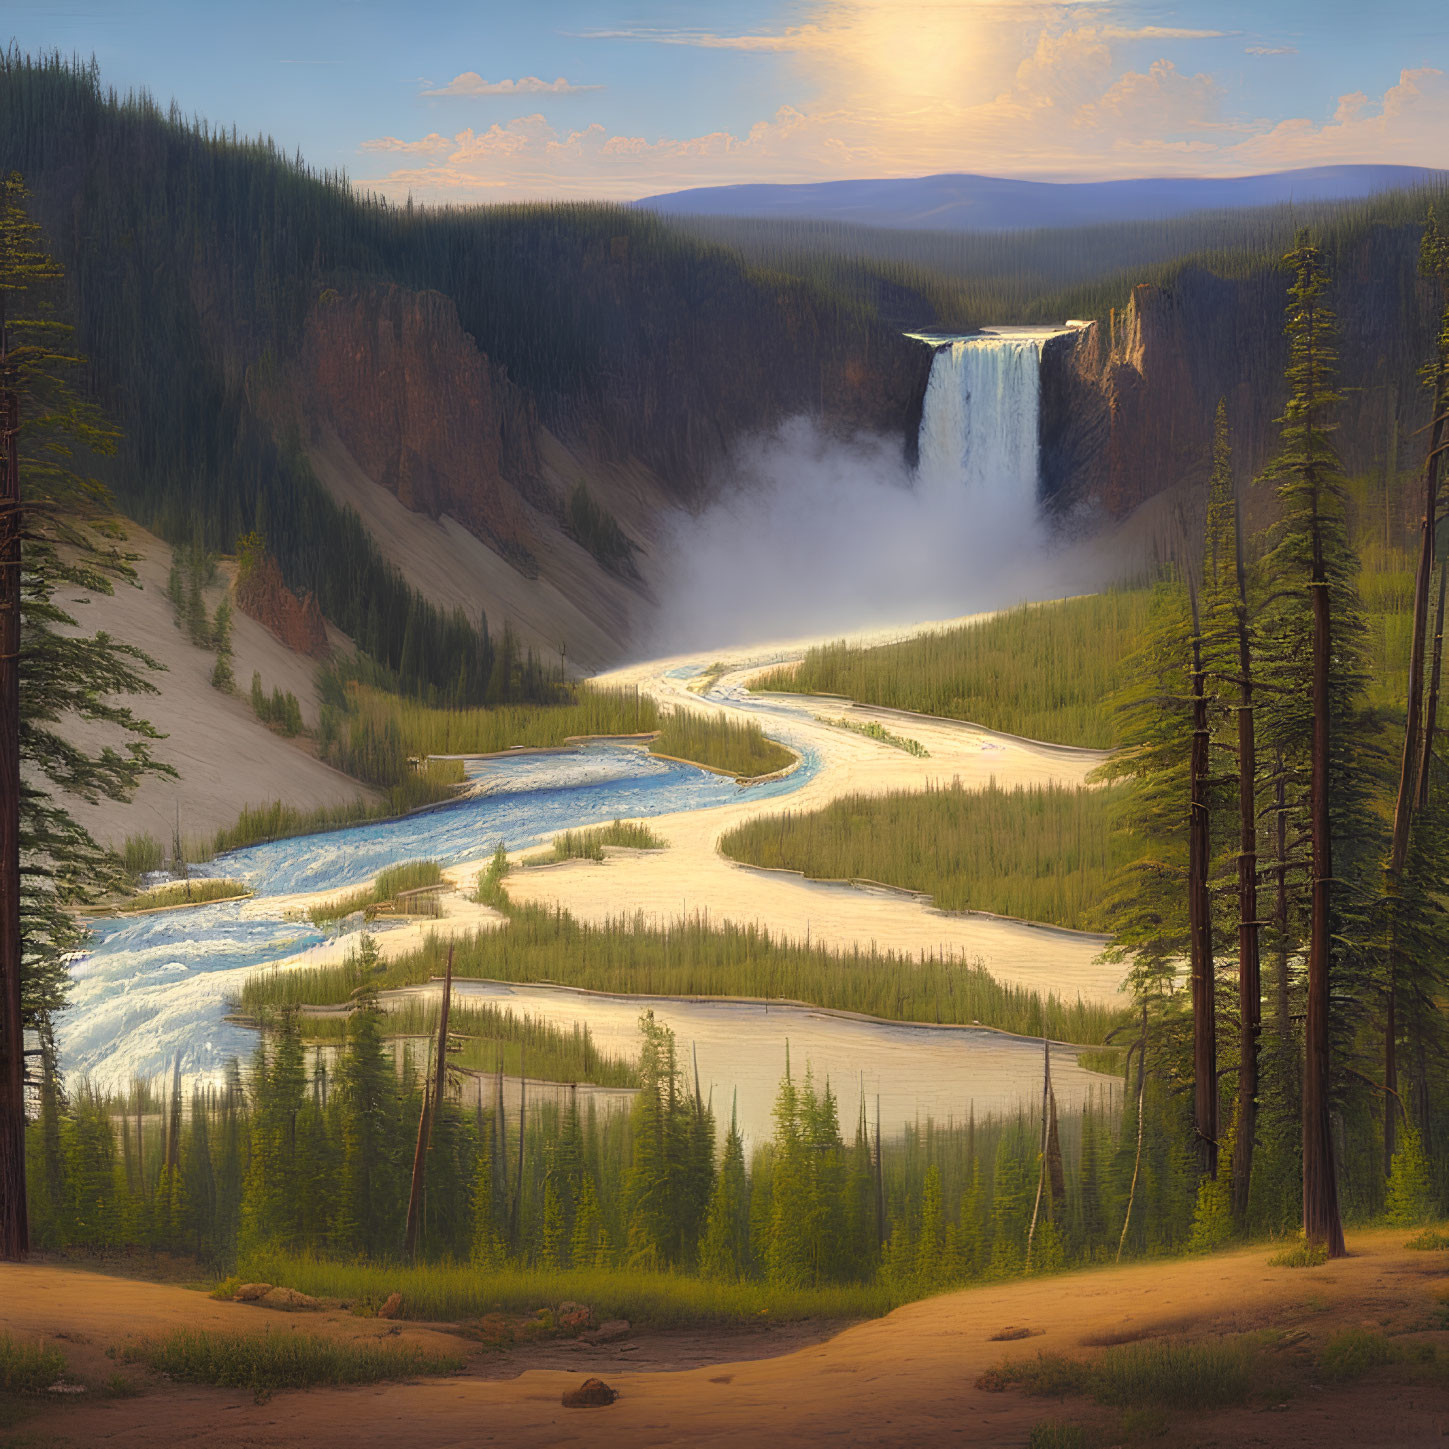 Tranquil landscape: waterfall, river, pine forest, soft sky